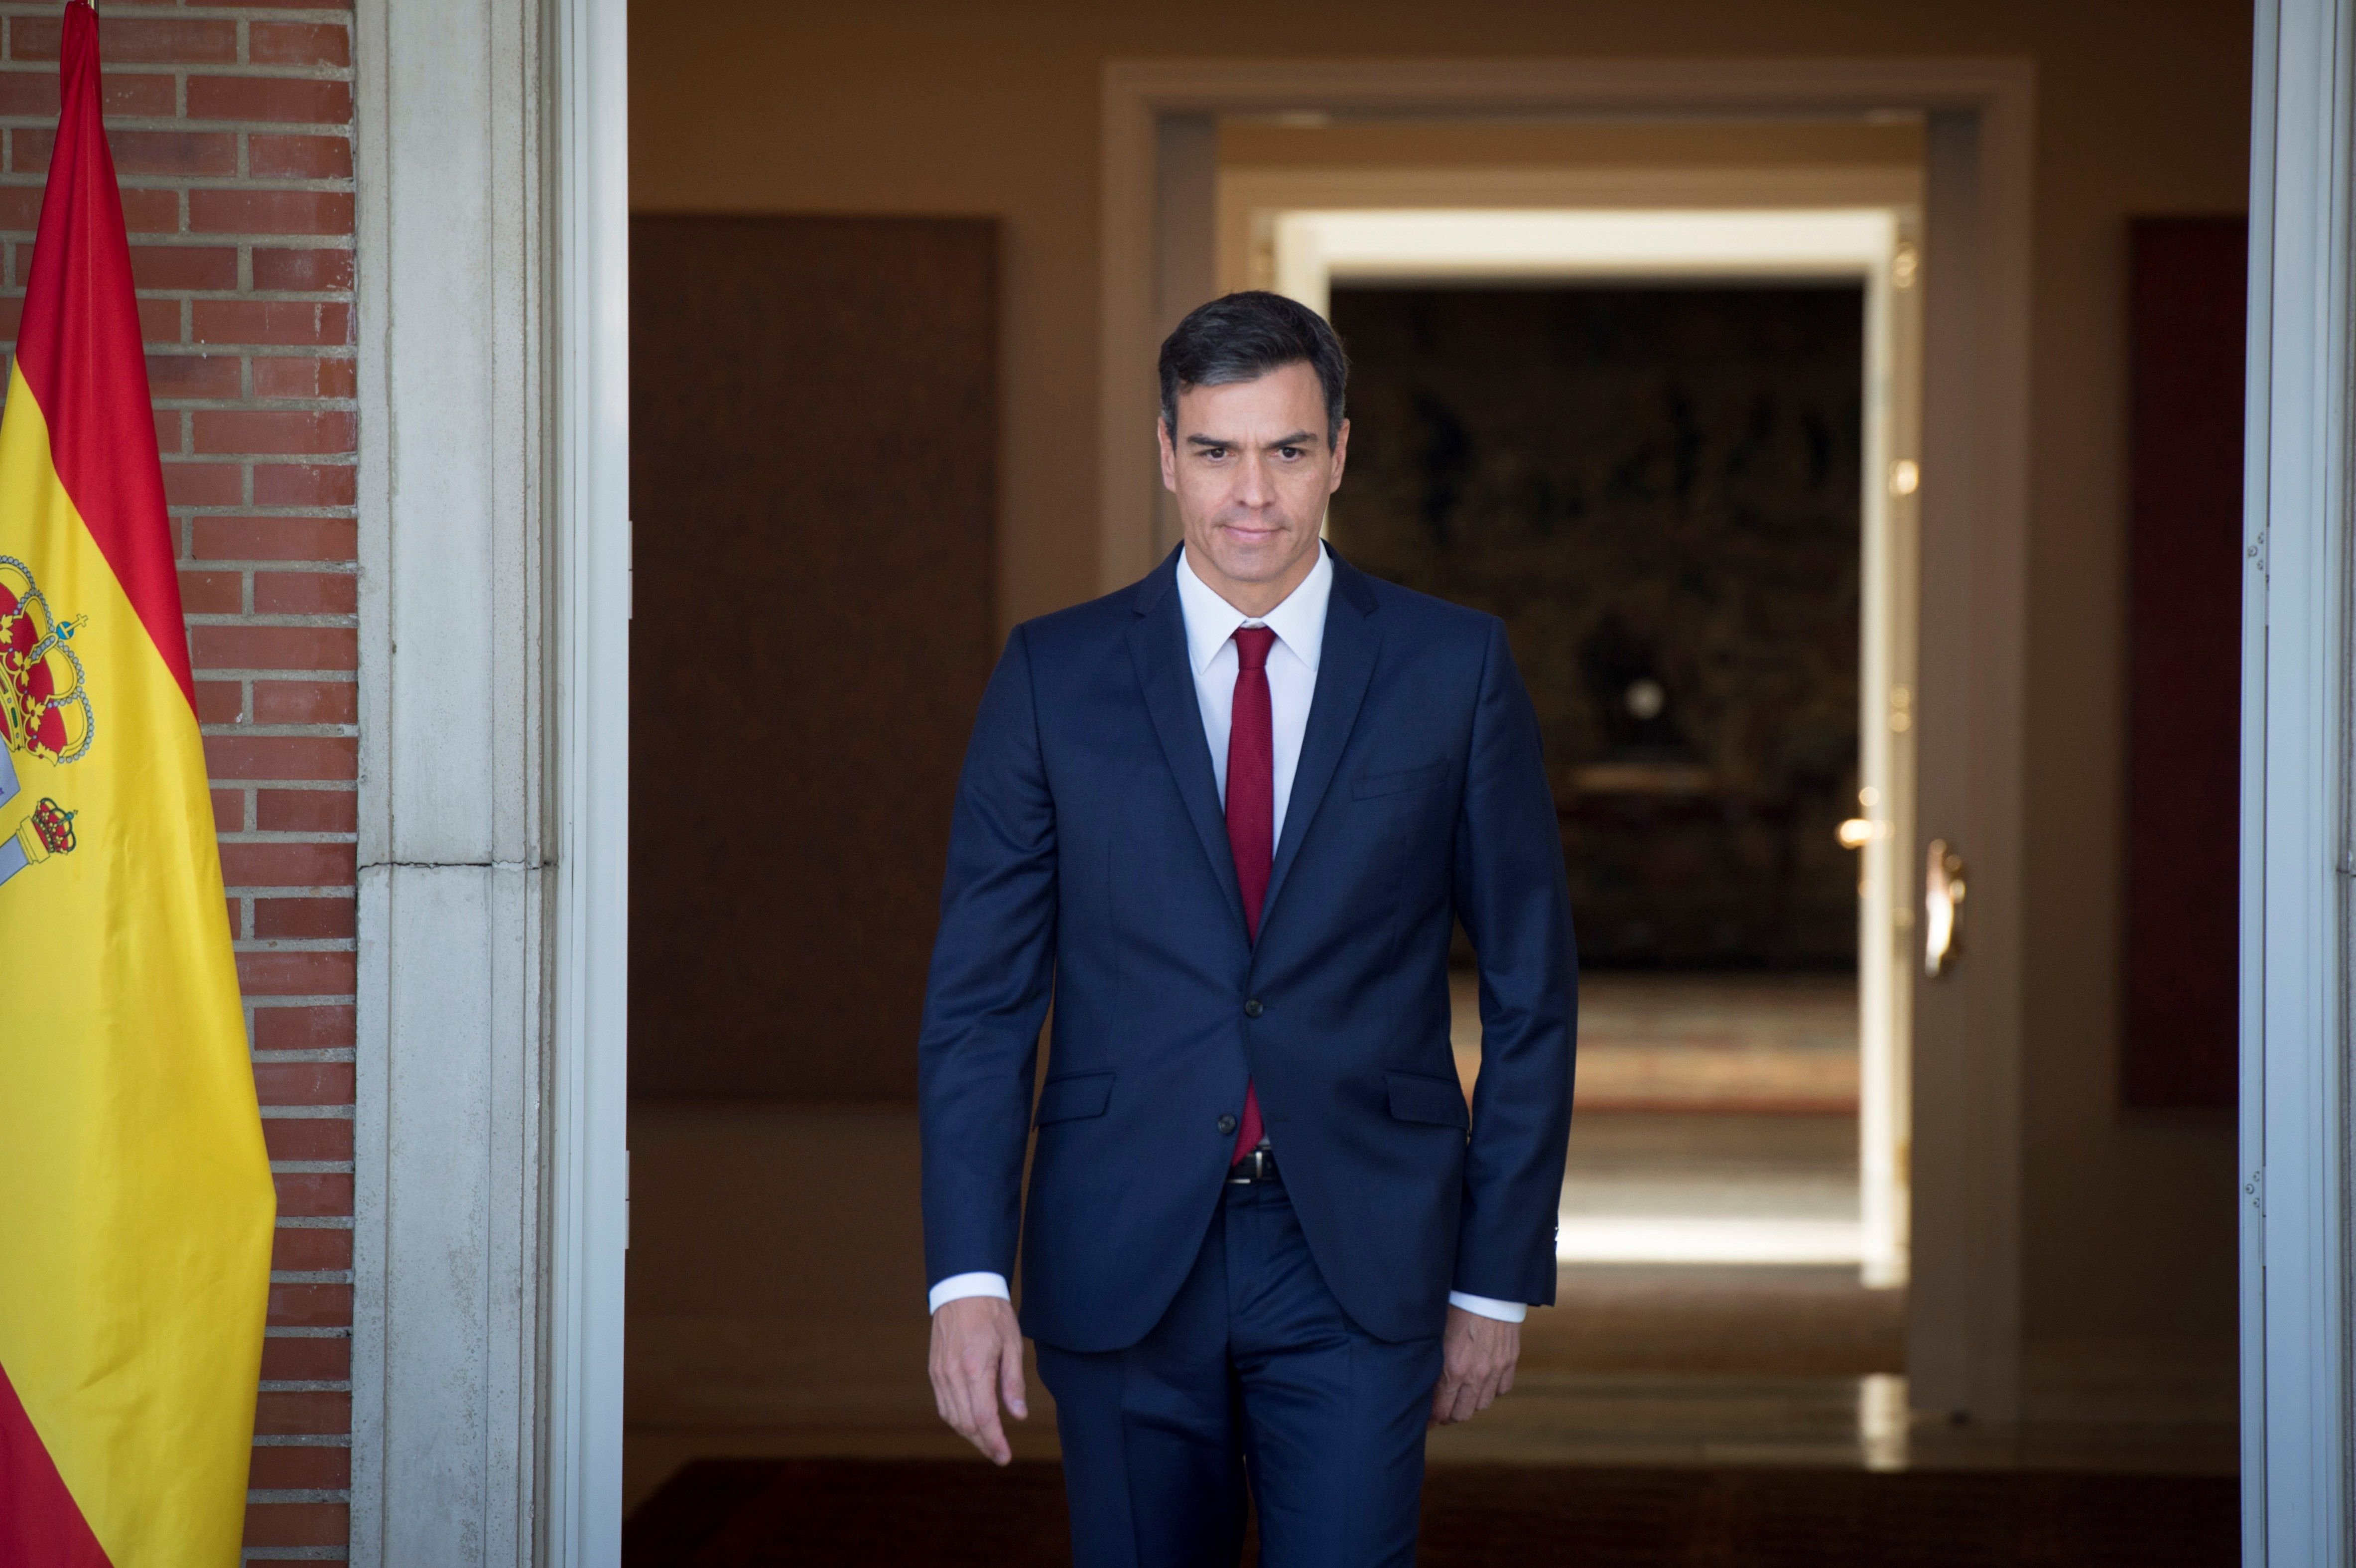 Sánchez becoming PM sends PSOE soaring in polls